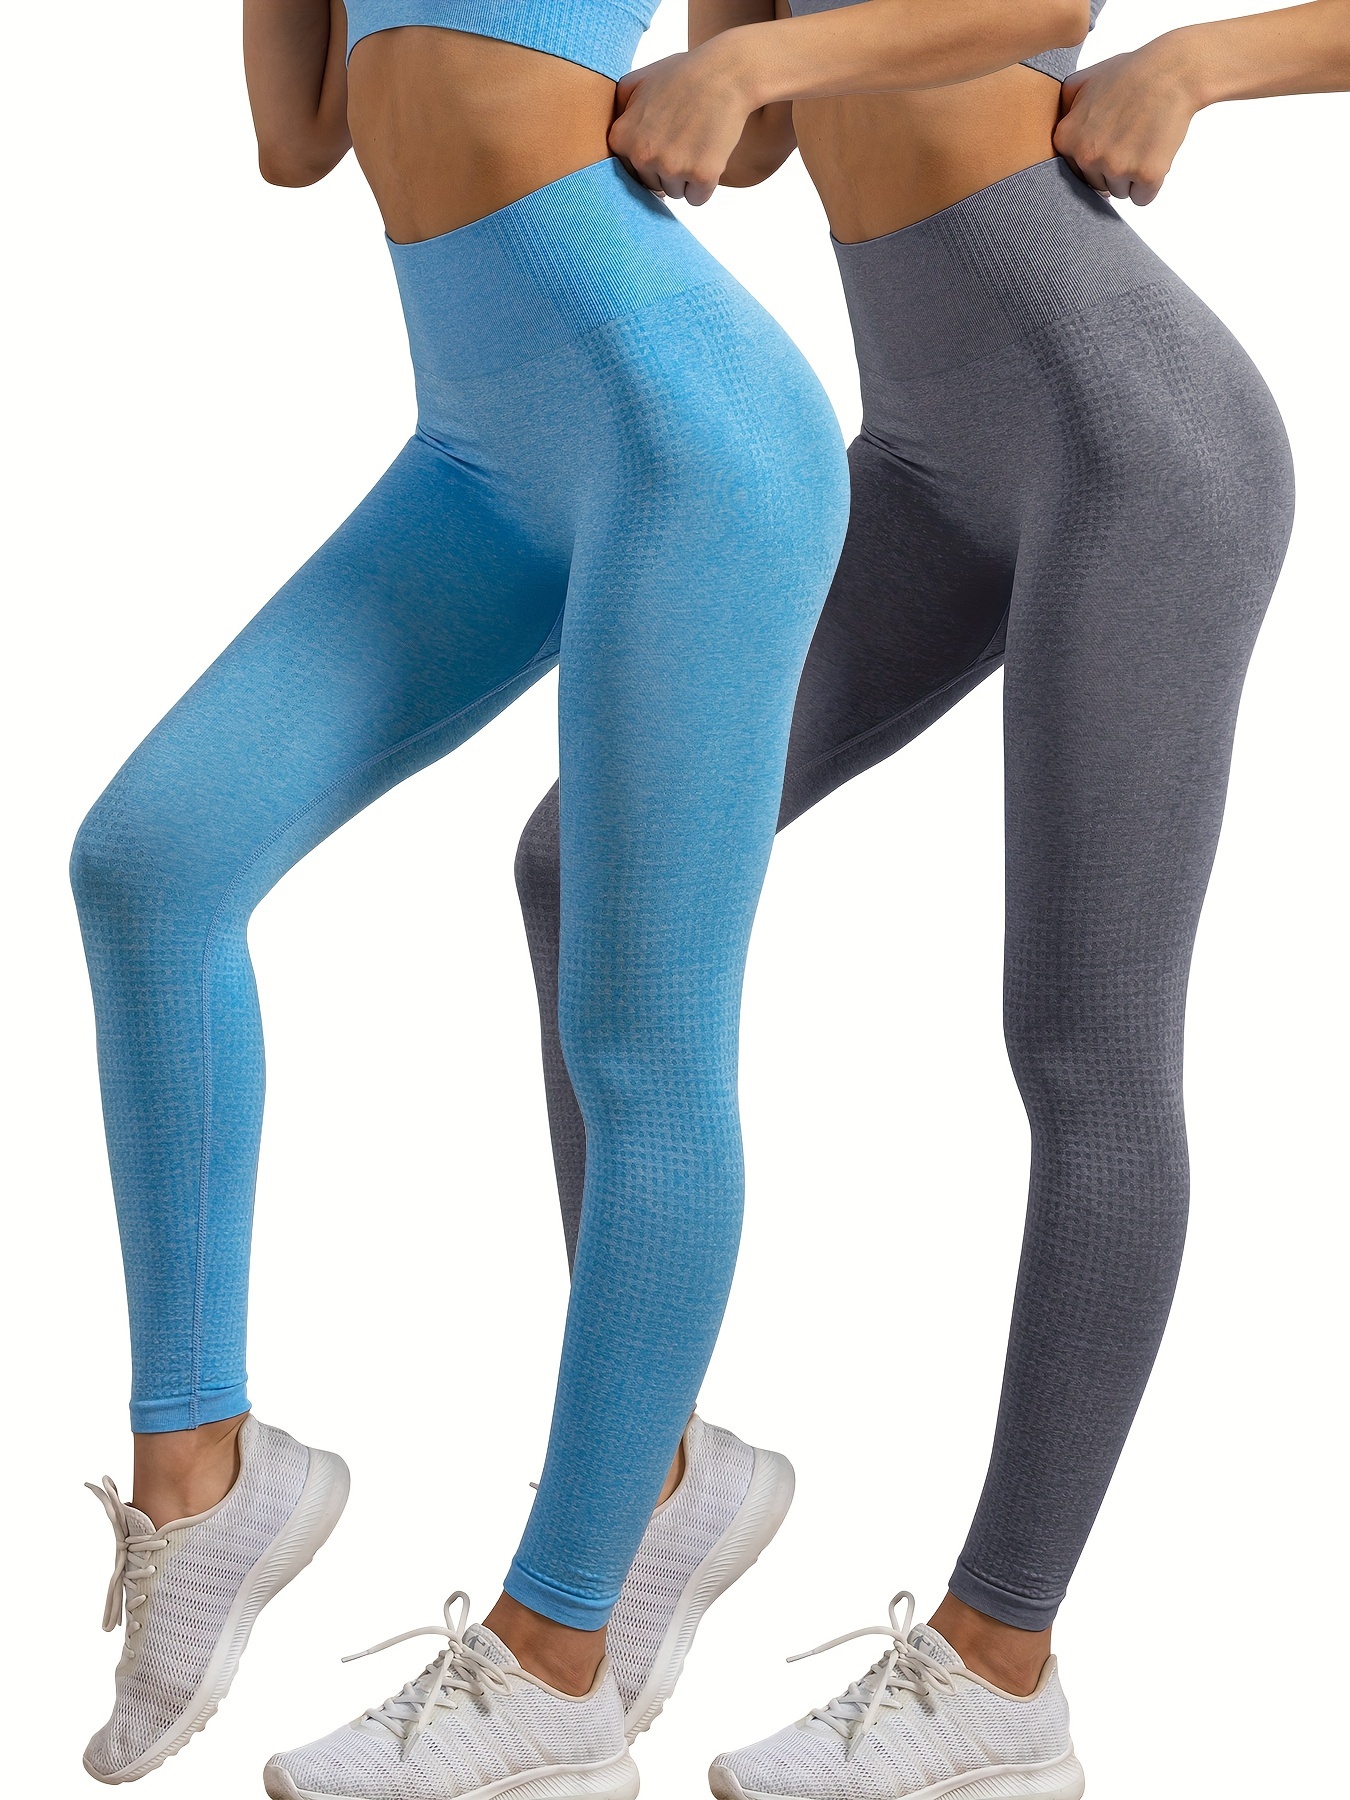 see through running tights